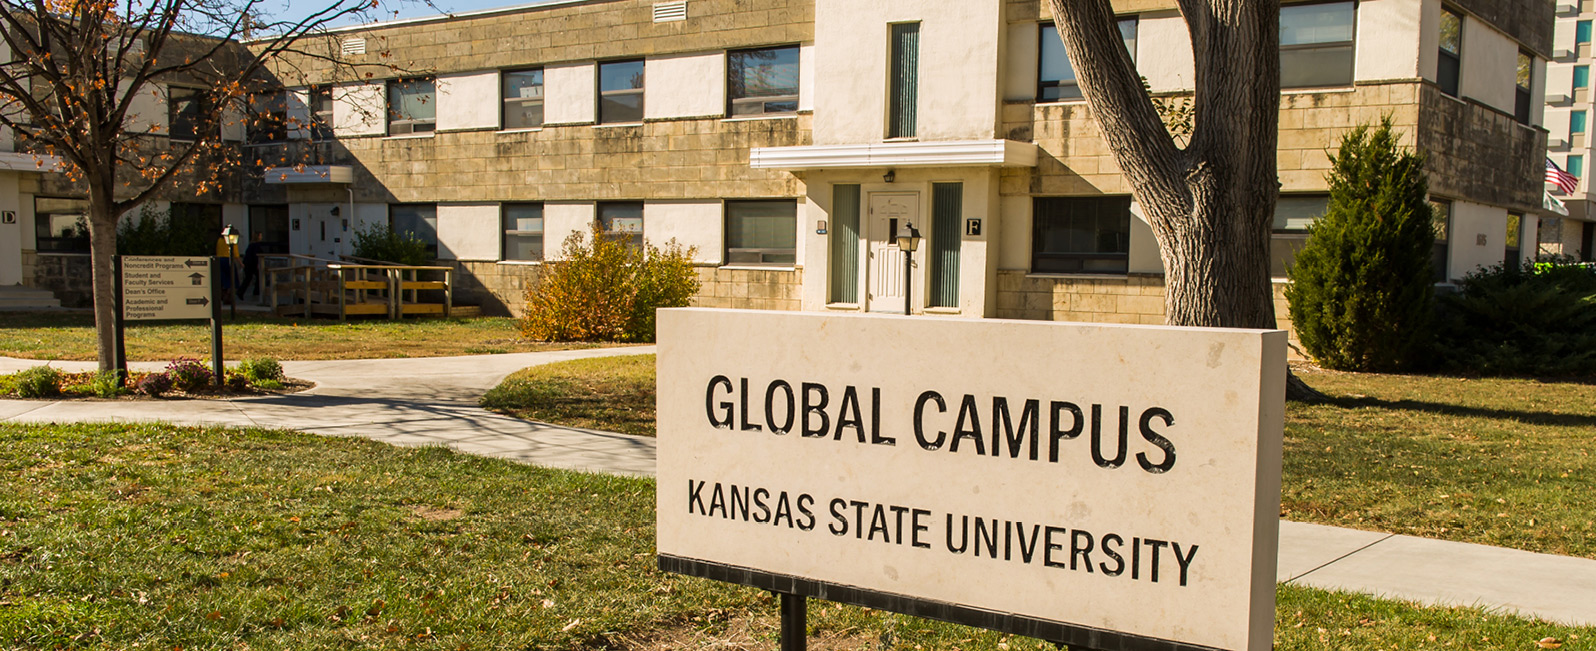 entrance and garden area of k-state's global campus